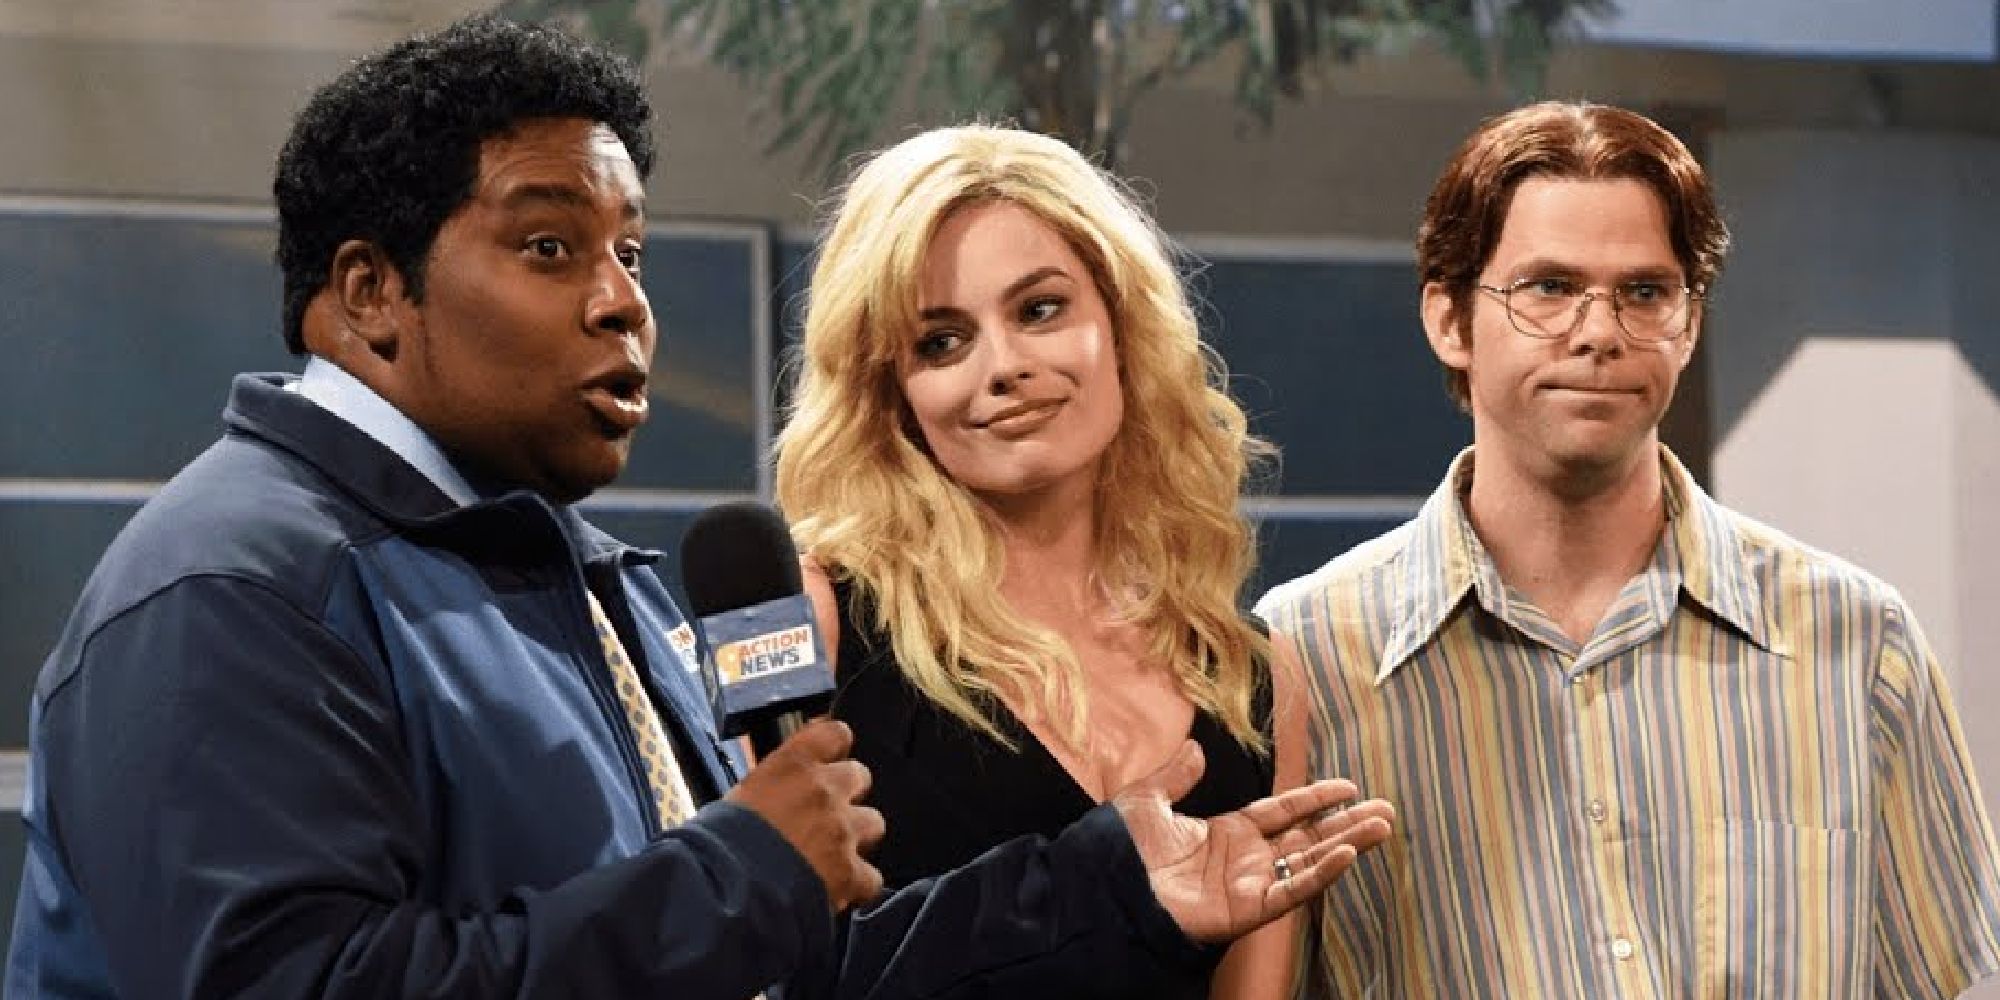 Kenan as a reporter interviewing Margot Robbie and Mikey Day